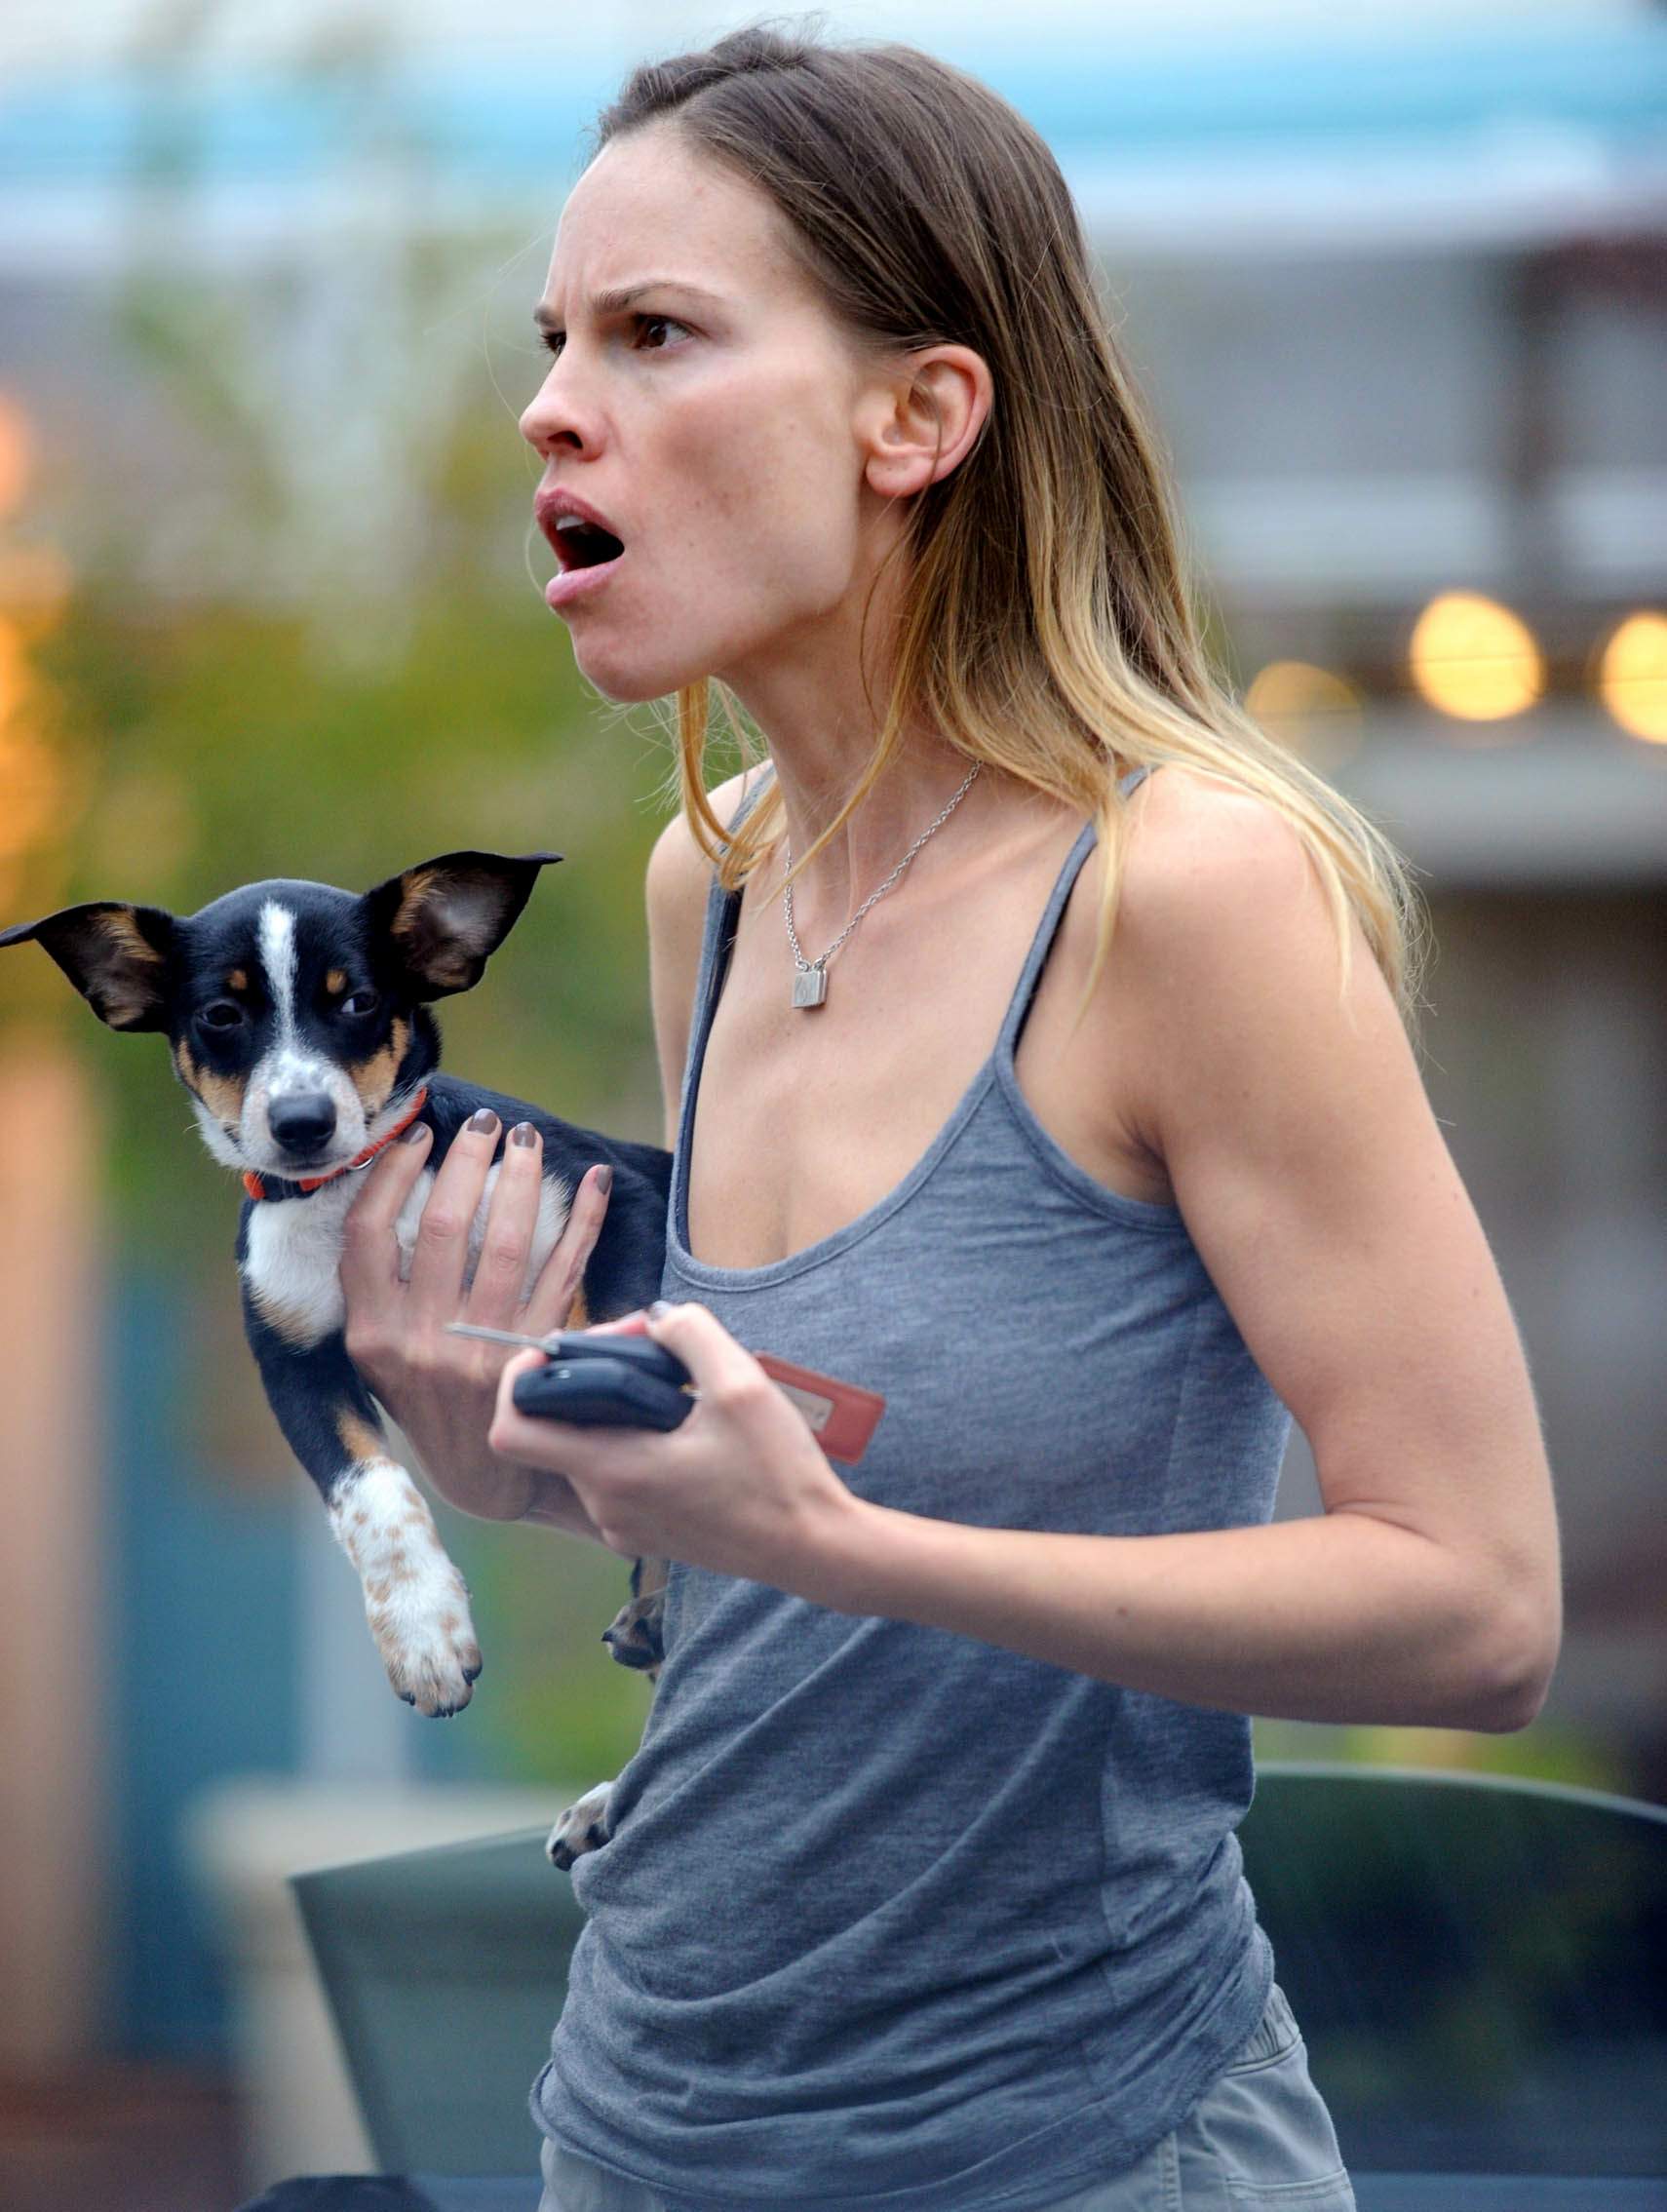 Next: Hilary_Swank_out_for_lunch_in_Santa_Monica_3_122_387lo.jpg. 